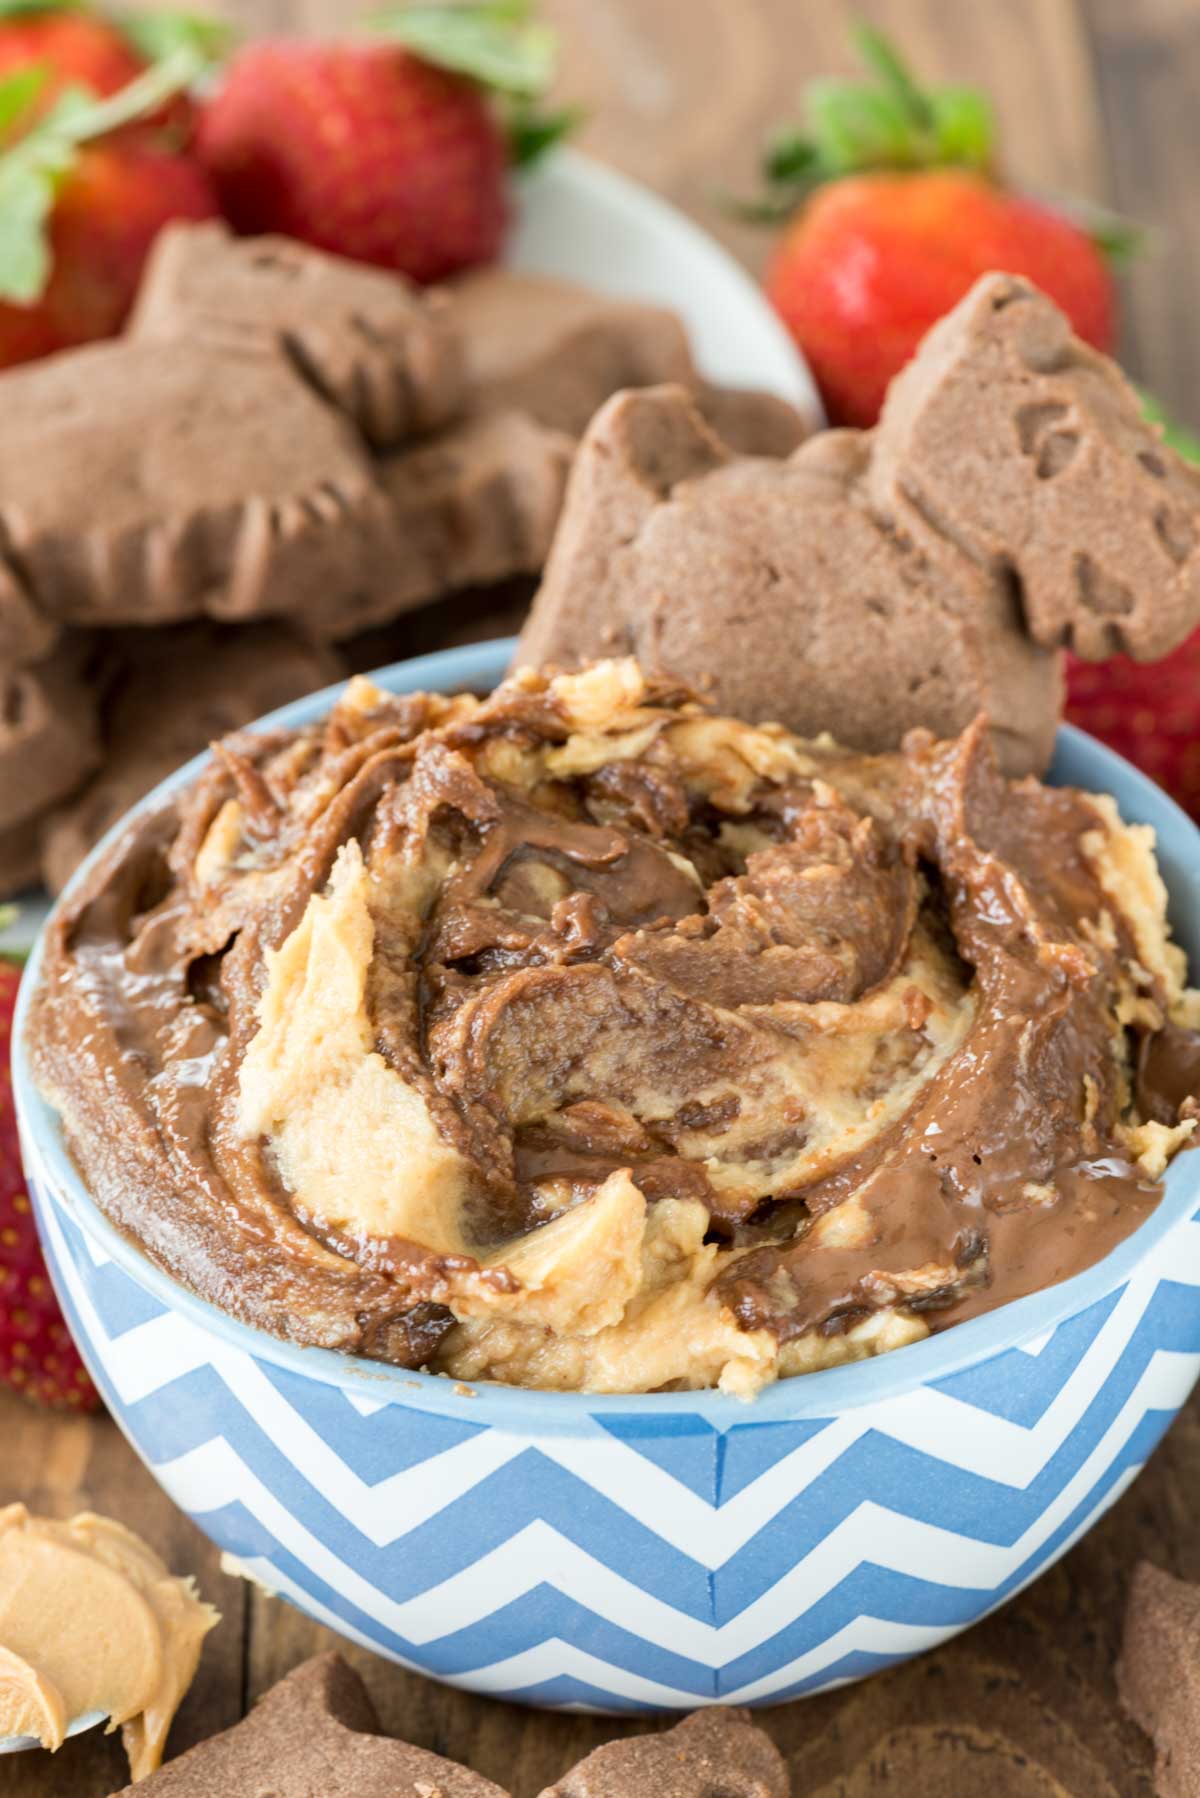 peanut butter and chocolate dip in a blue and white bowl.